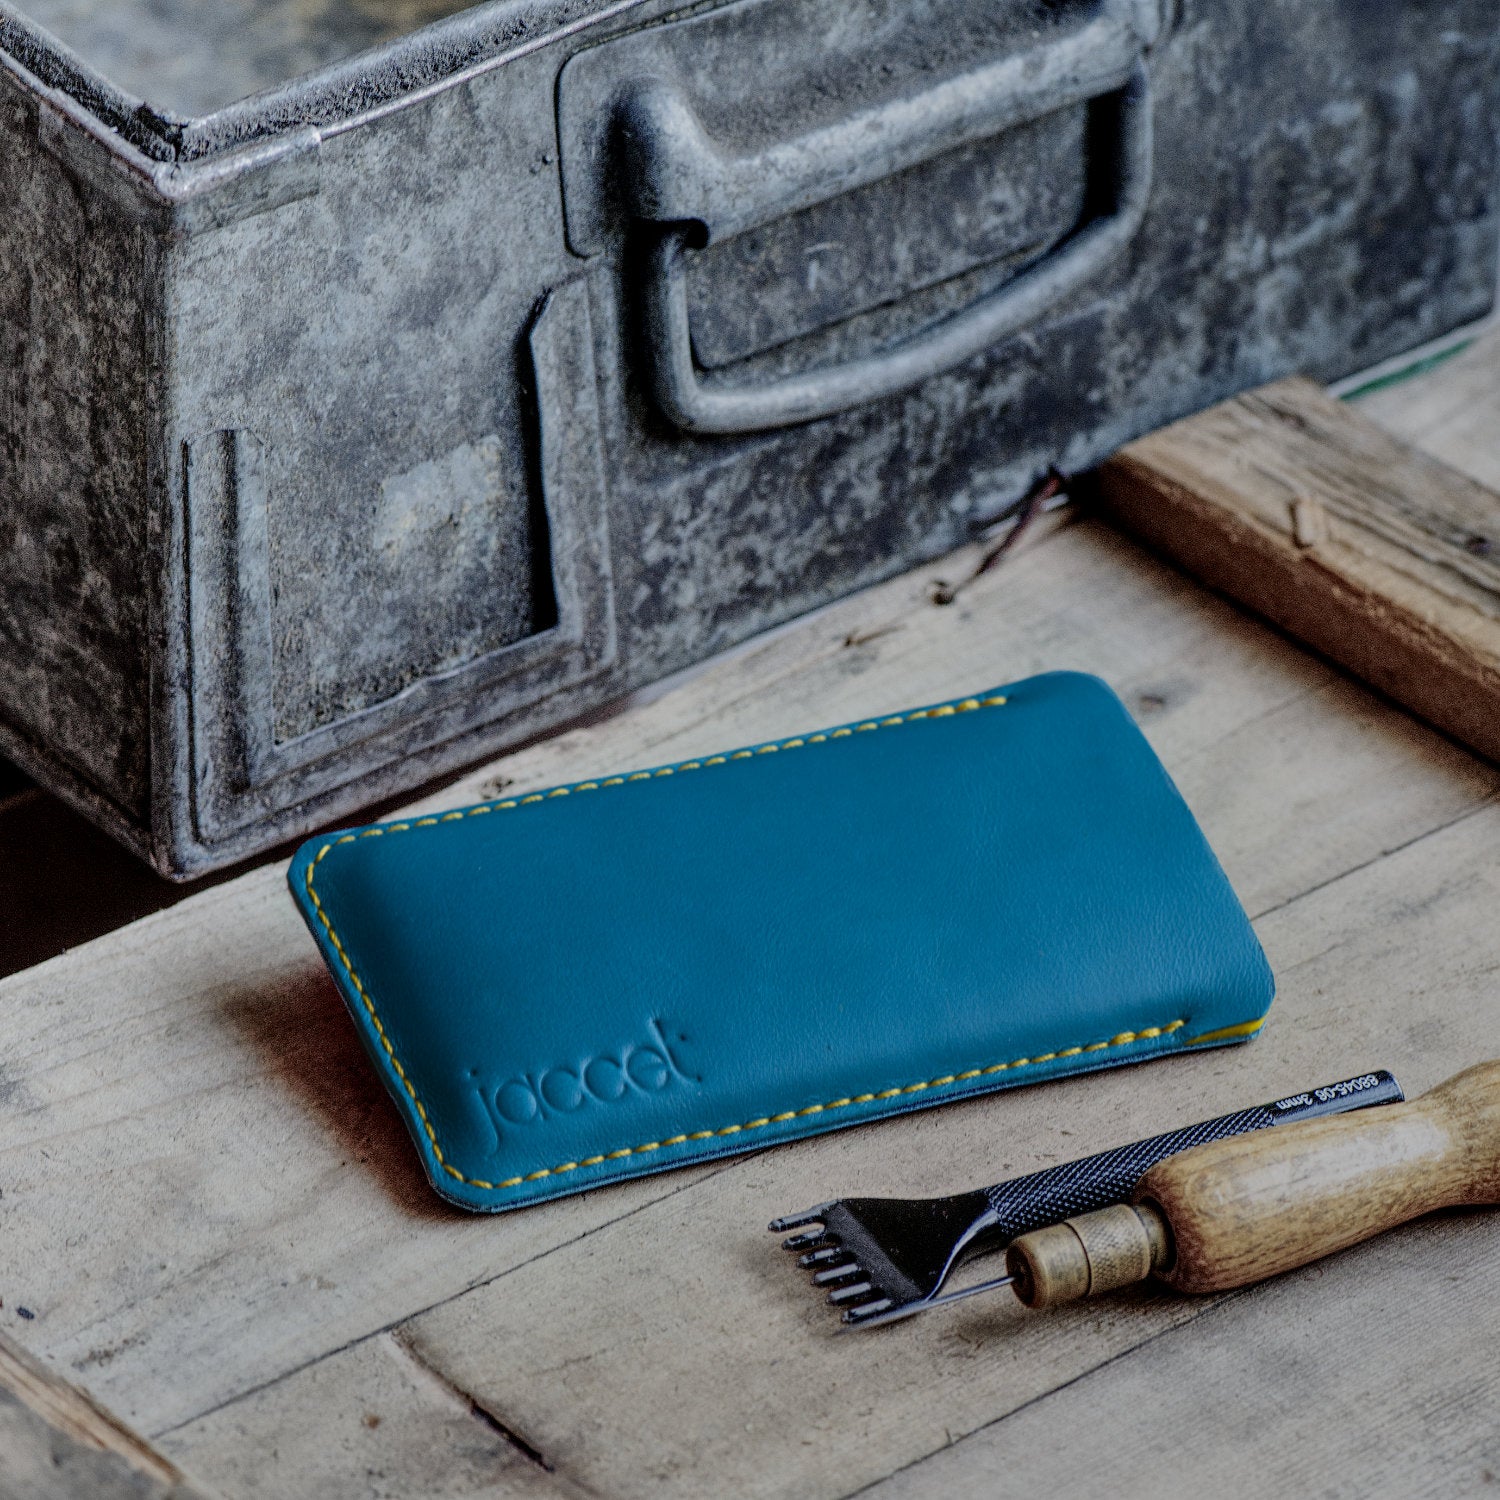 Full-grain leather iPhone sleeve - Turquoise leather with yellow wolvilt - 100% handmade